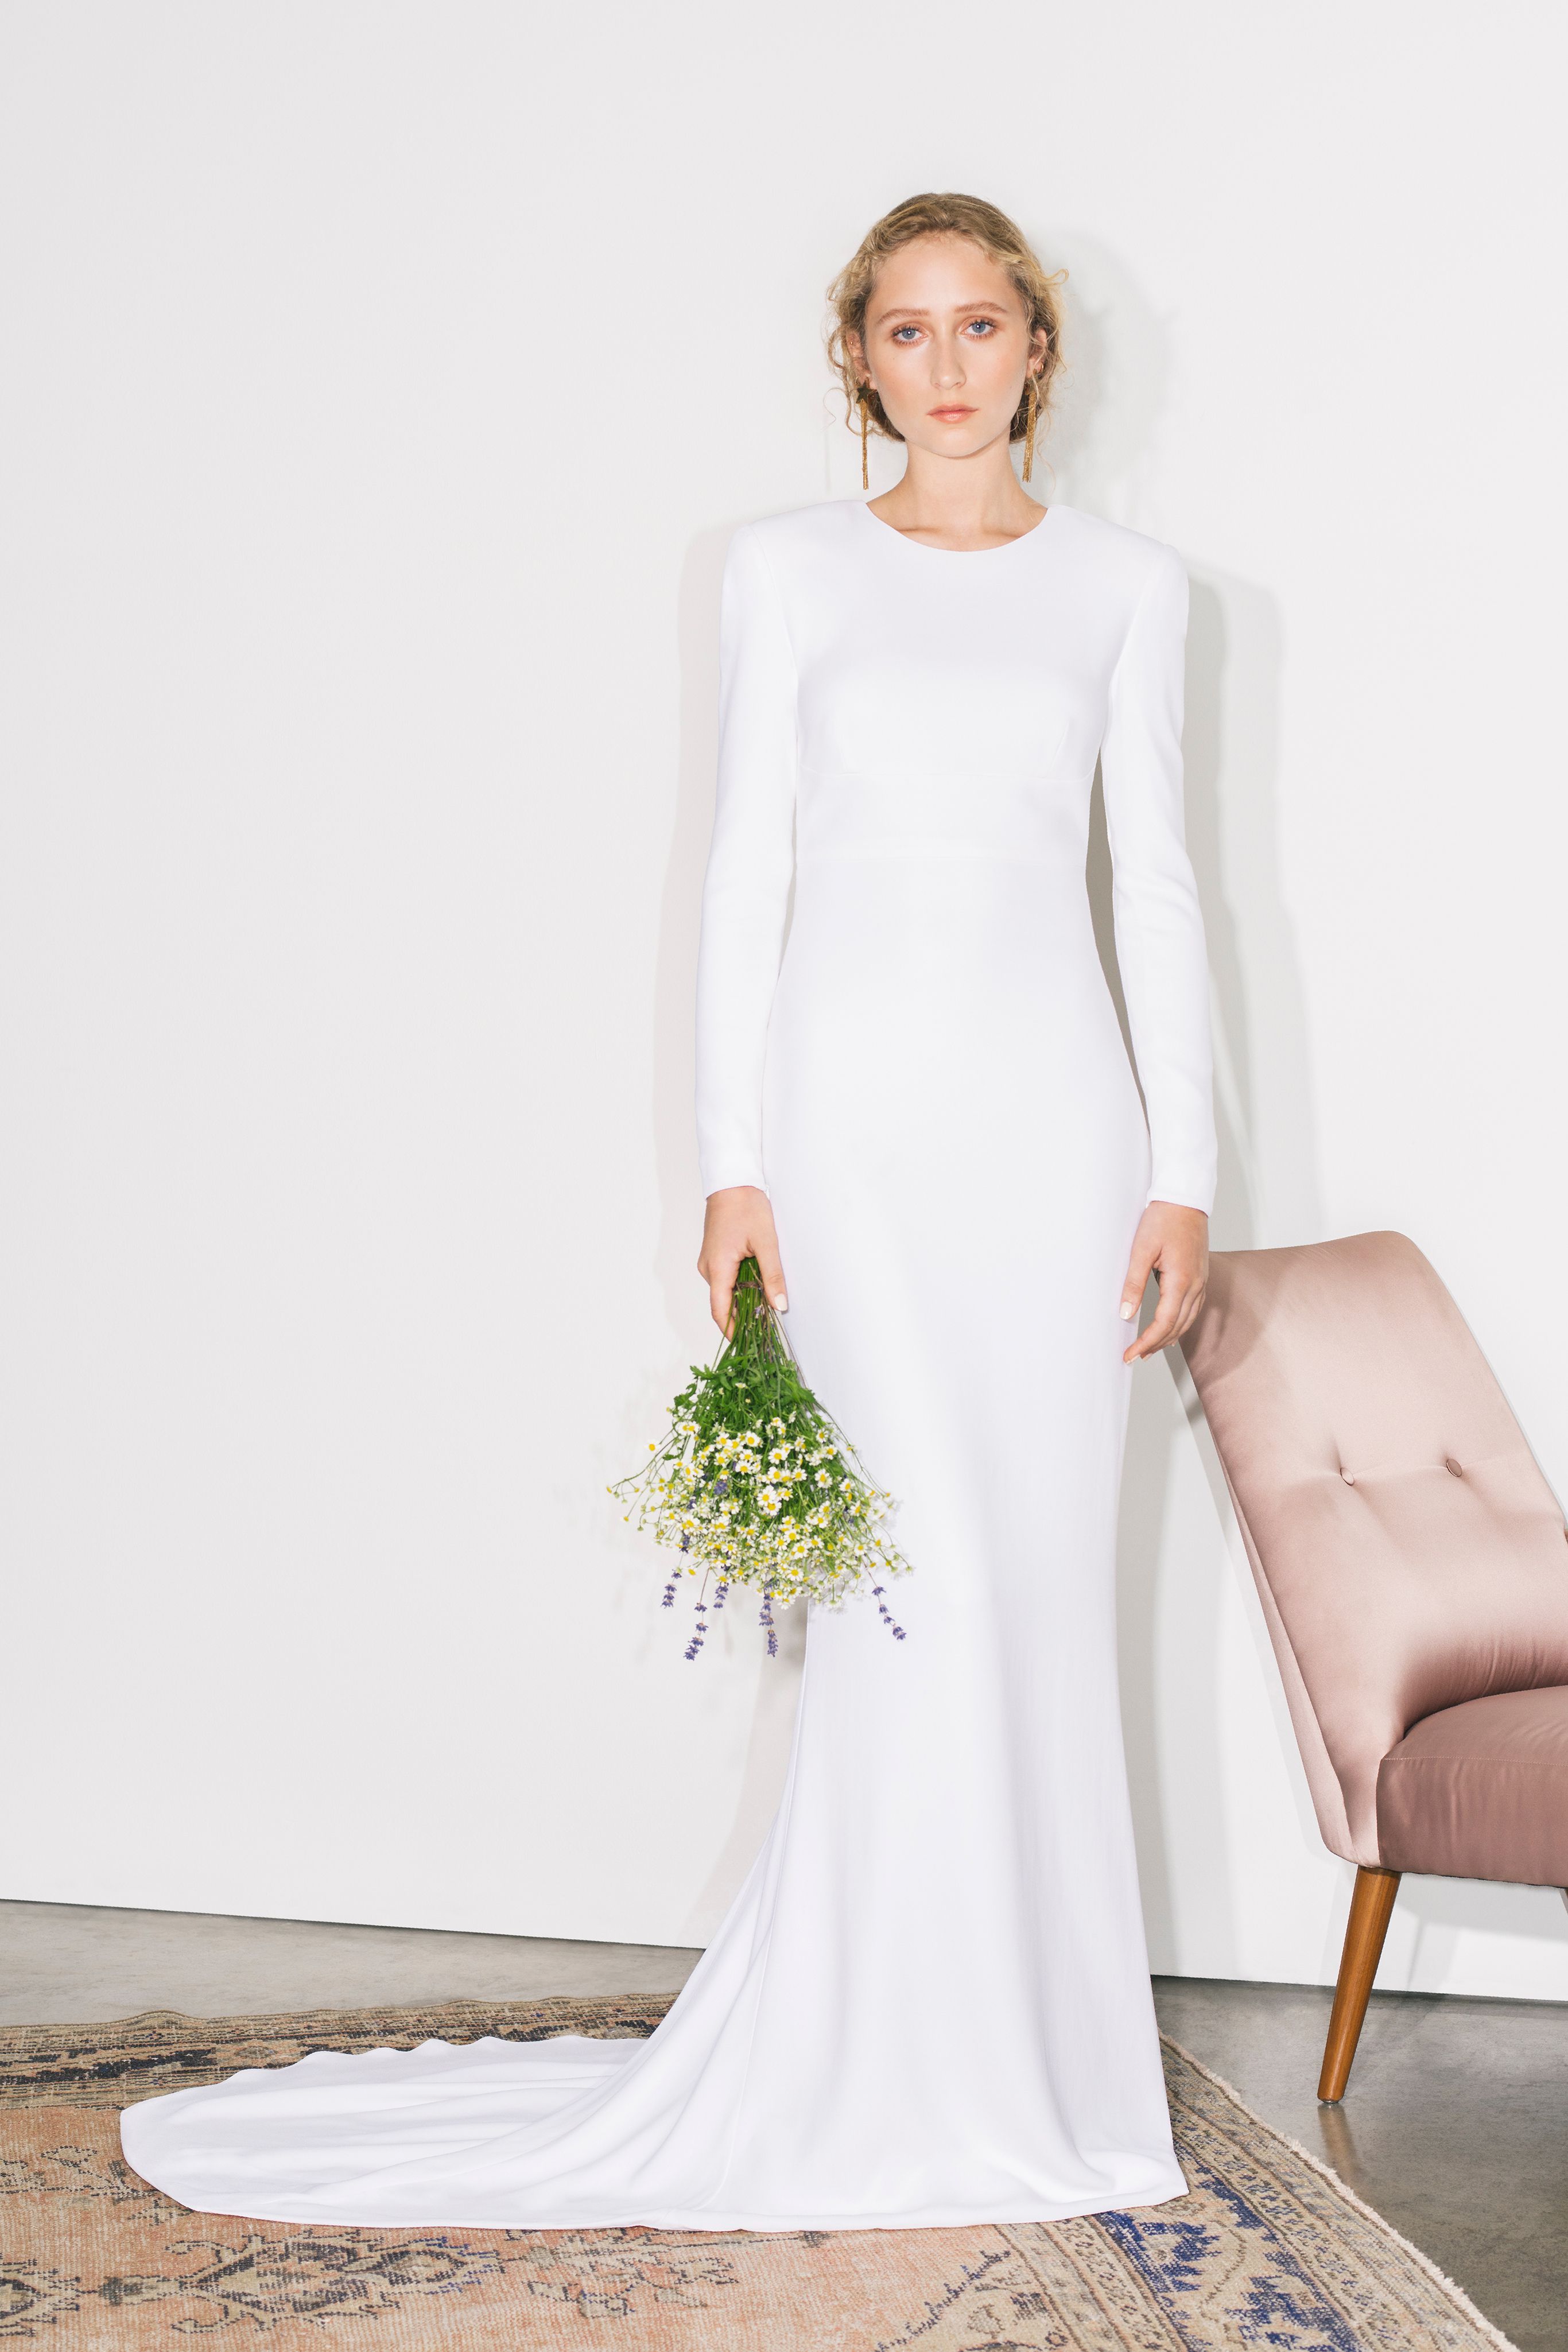 Stella McCartney's Bridal Collection Will Make You Feel Like a Royal